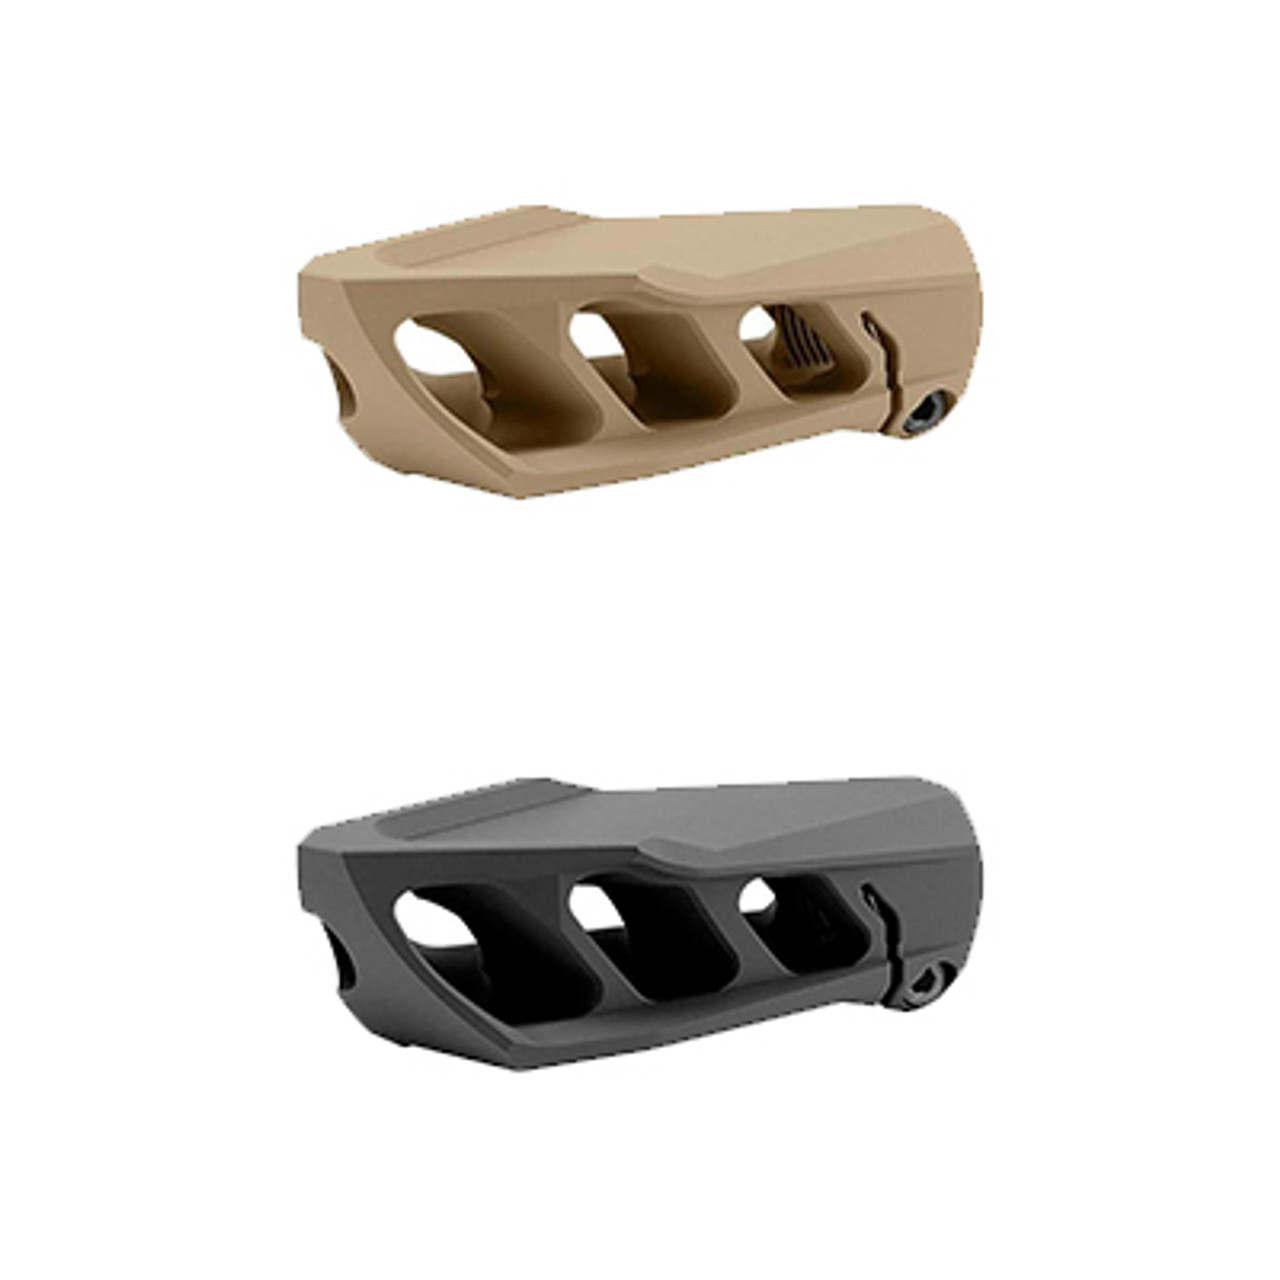 Cadex MX-1 Muzzle Break for calibers for .50 cal BMG available here in the  USA